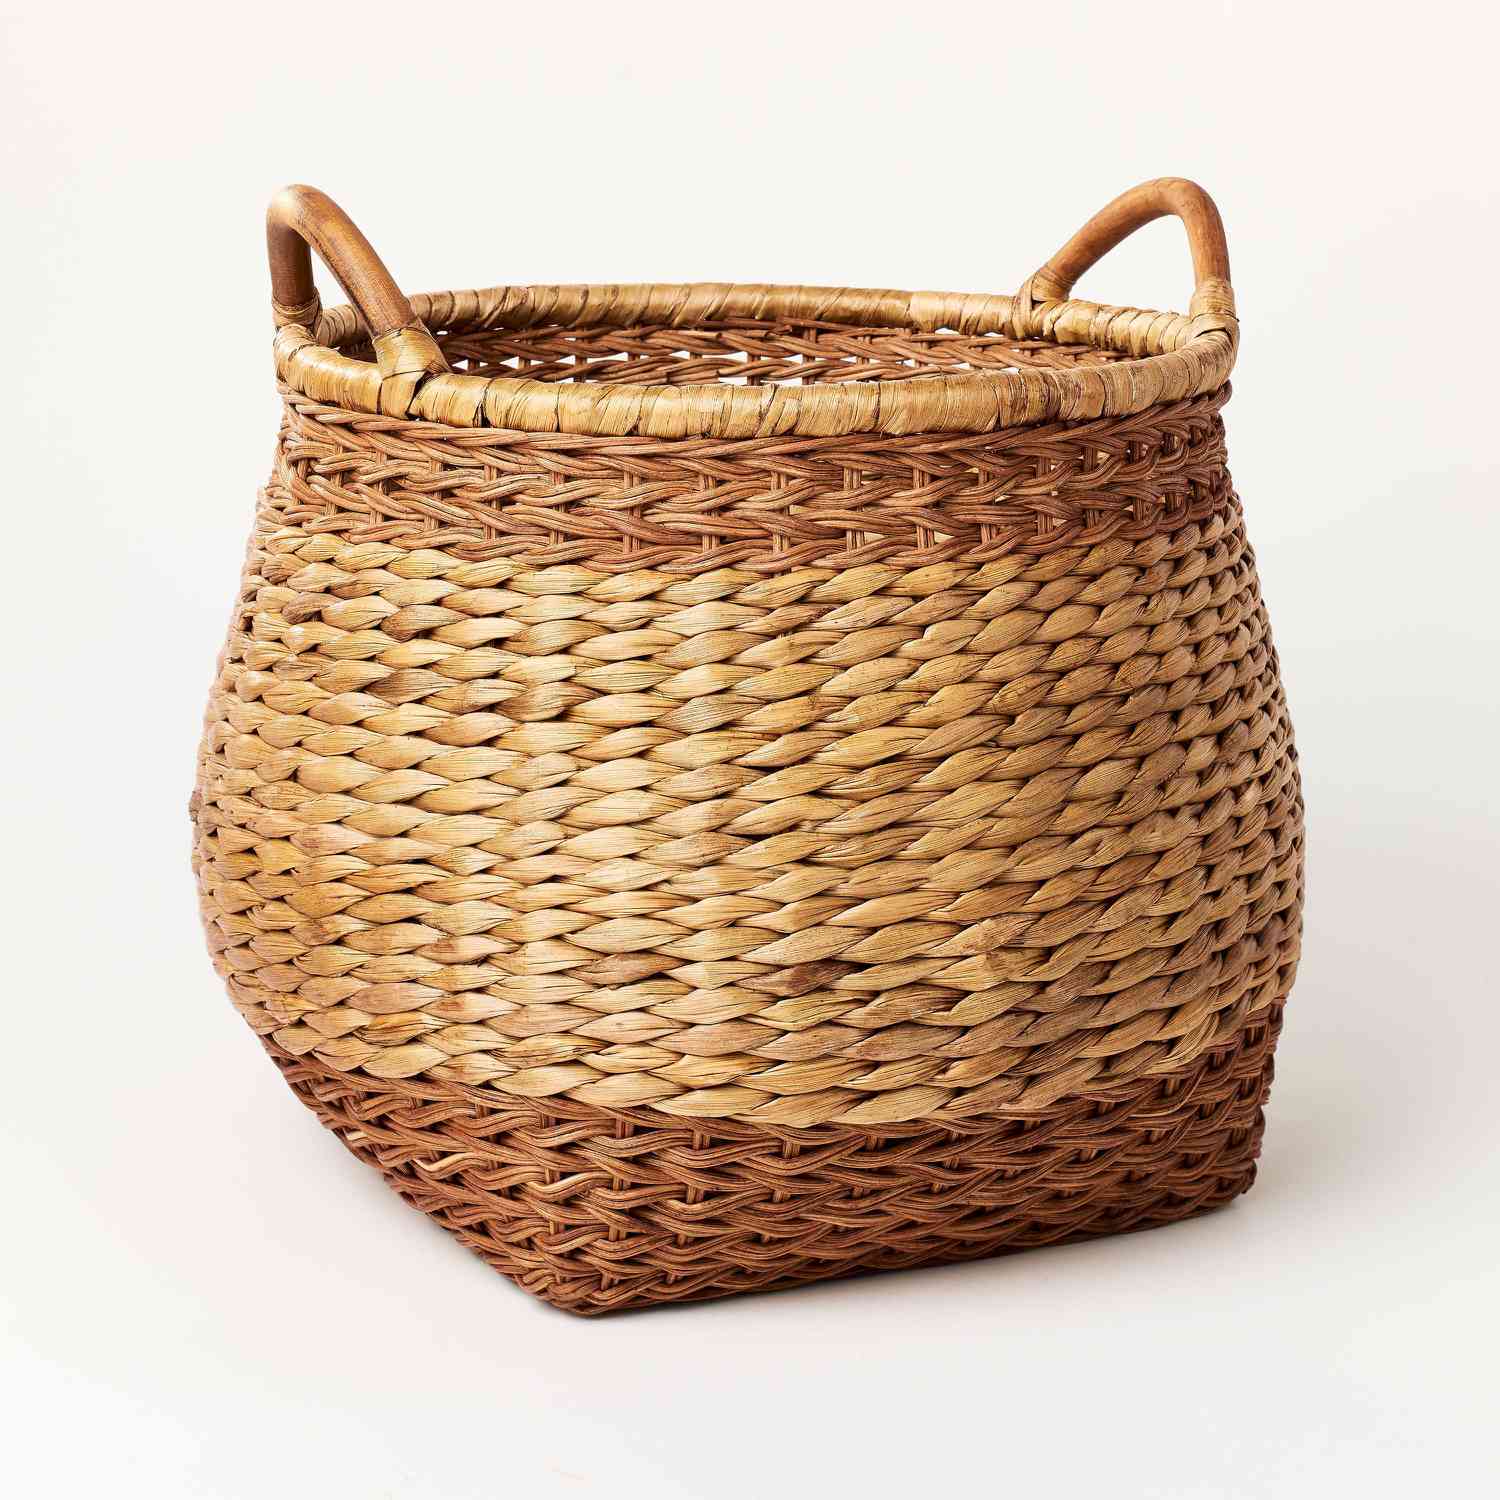 Belly basket with handles